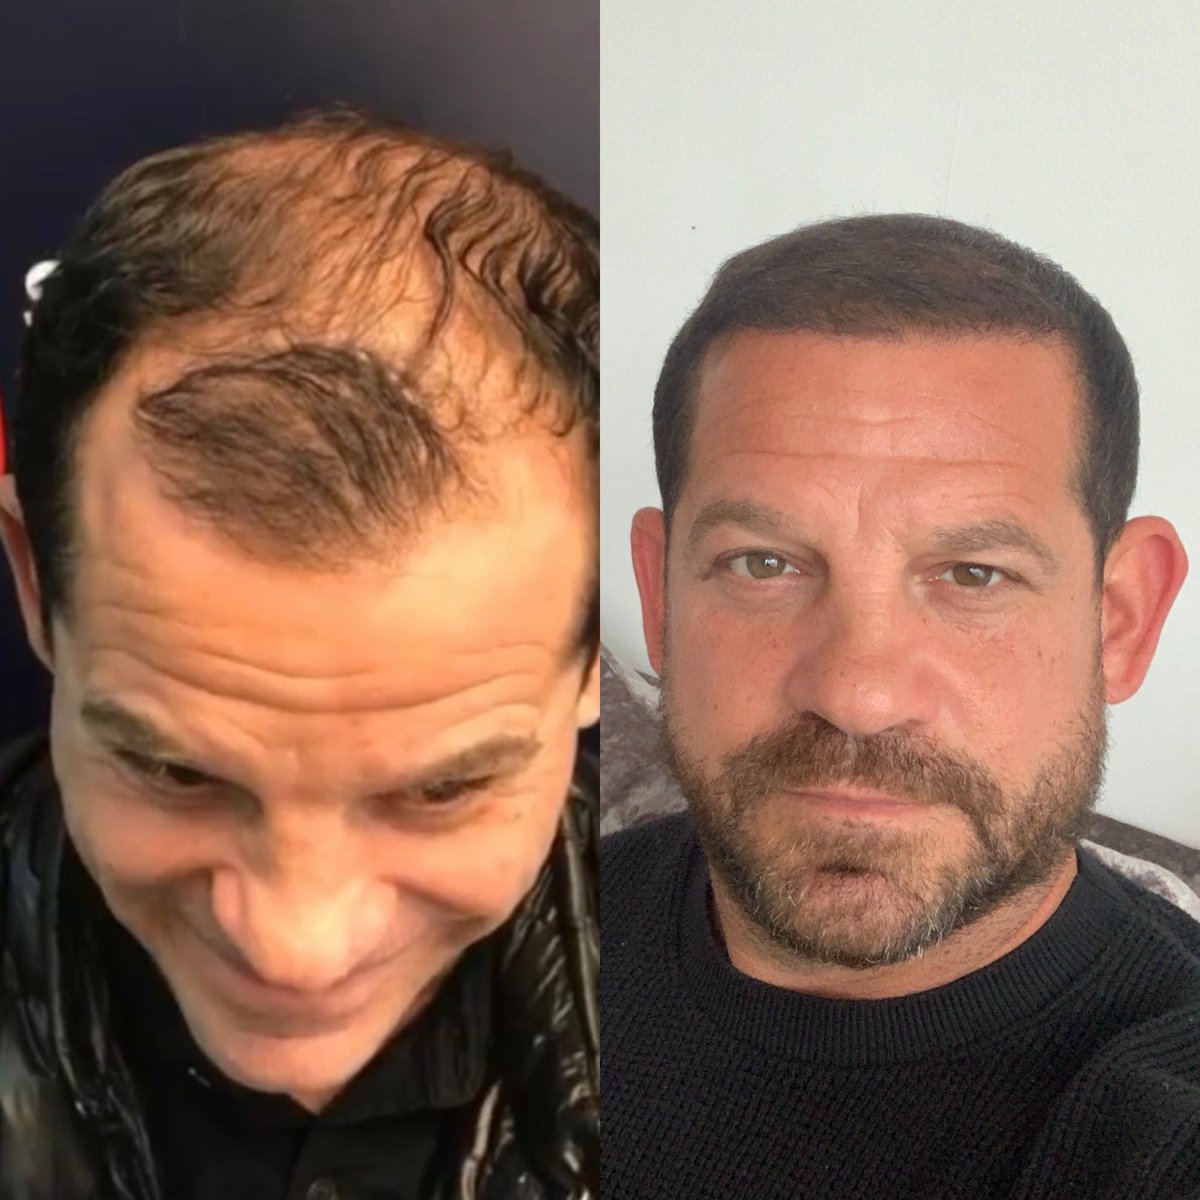 Here’s the amazing results of my hair transplant after 5 months, can’t thank the @Brithairclinic enough, I’m your thinking about getting your hair done, DM me for more info 👍🏻👊🏼